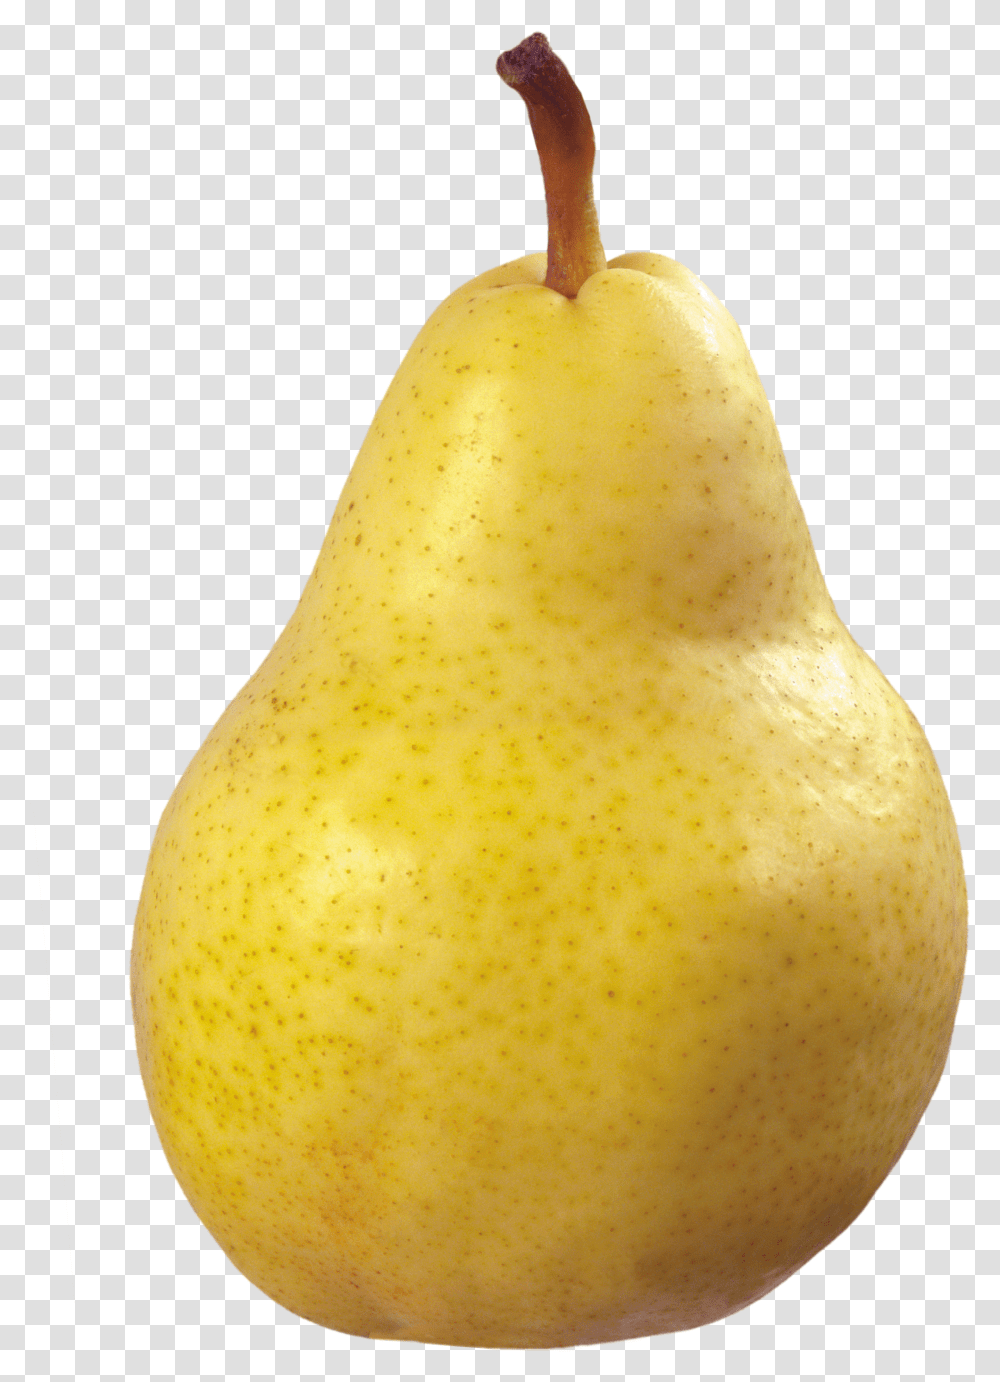 Yellow Pear Image With Pear Transparent Png